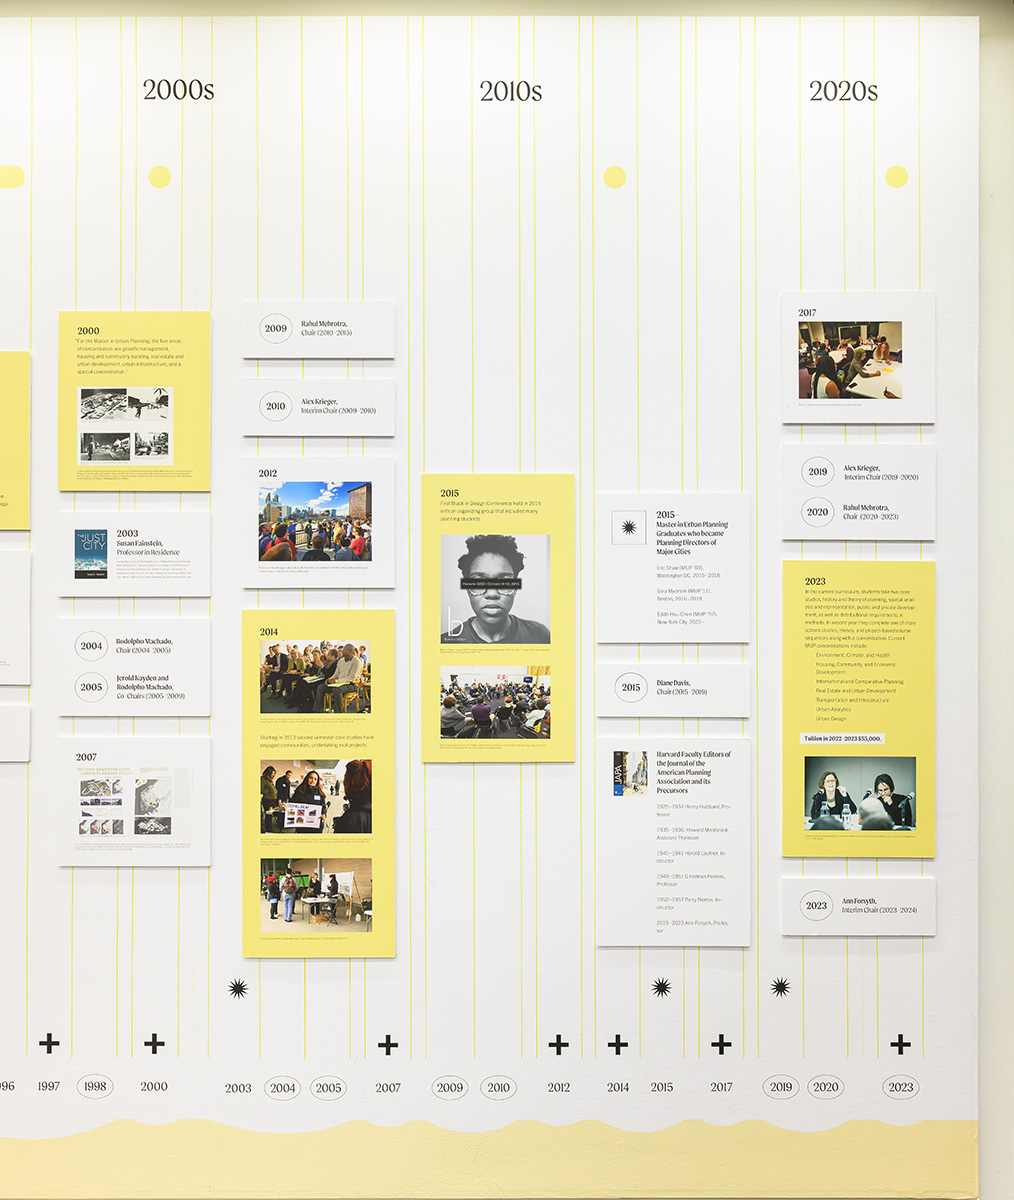 A detail of the timeline showing images and text from 2000 through 2023